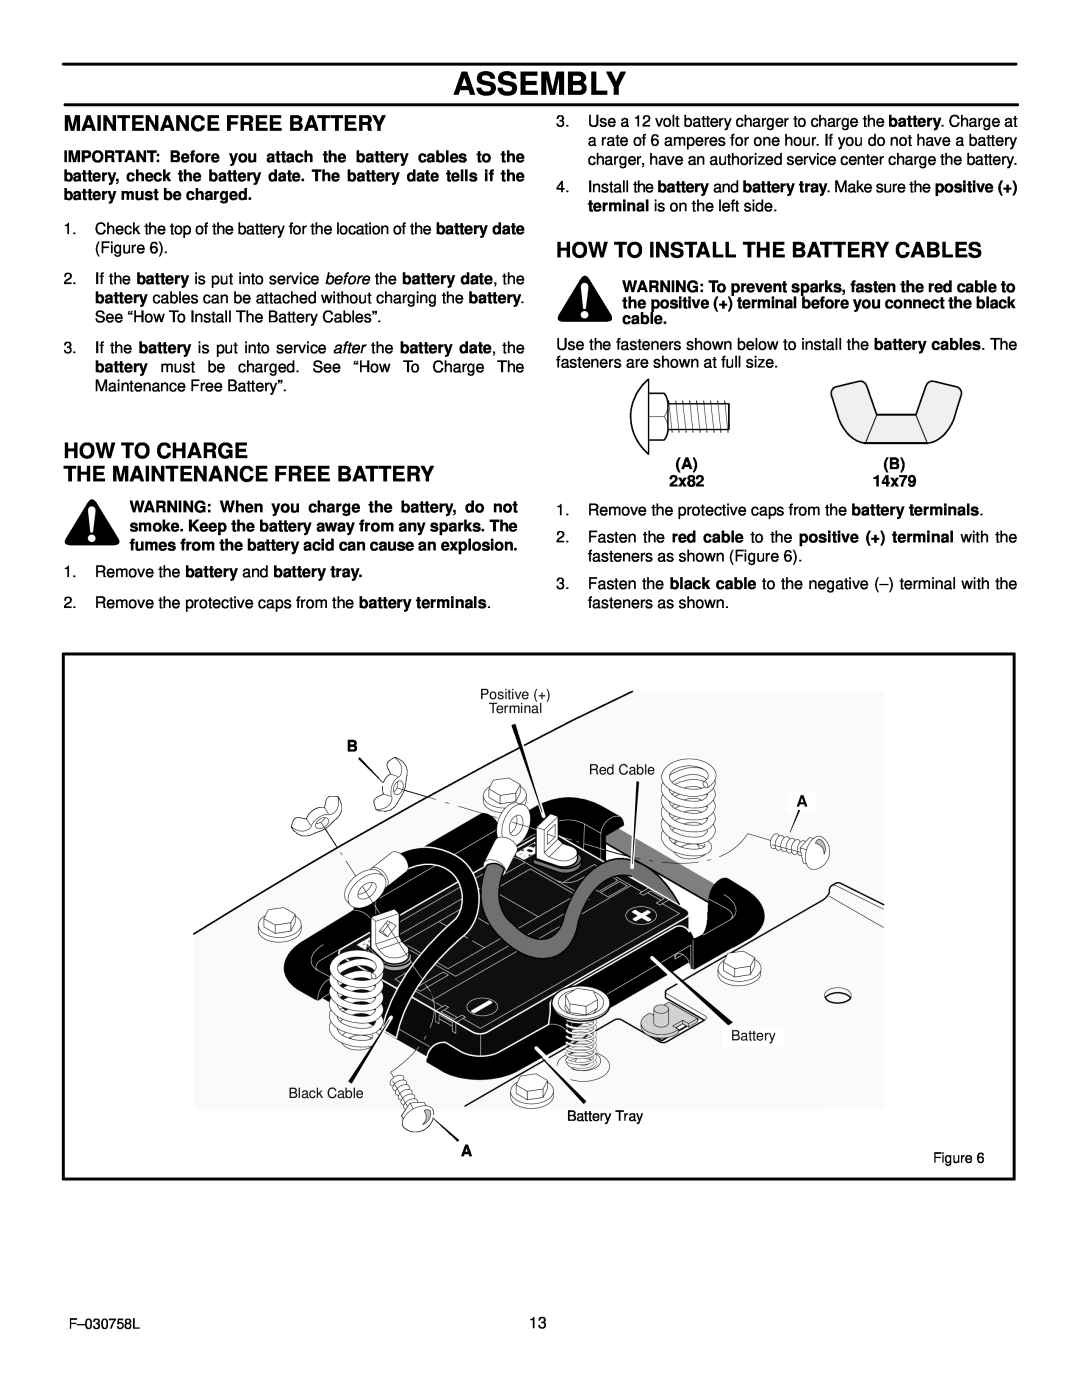 Murray 465609x24A manual Assembly, How To Charge The Maintenance Free Battery, How To Install The Battery Cables 